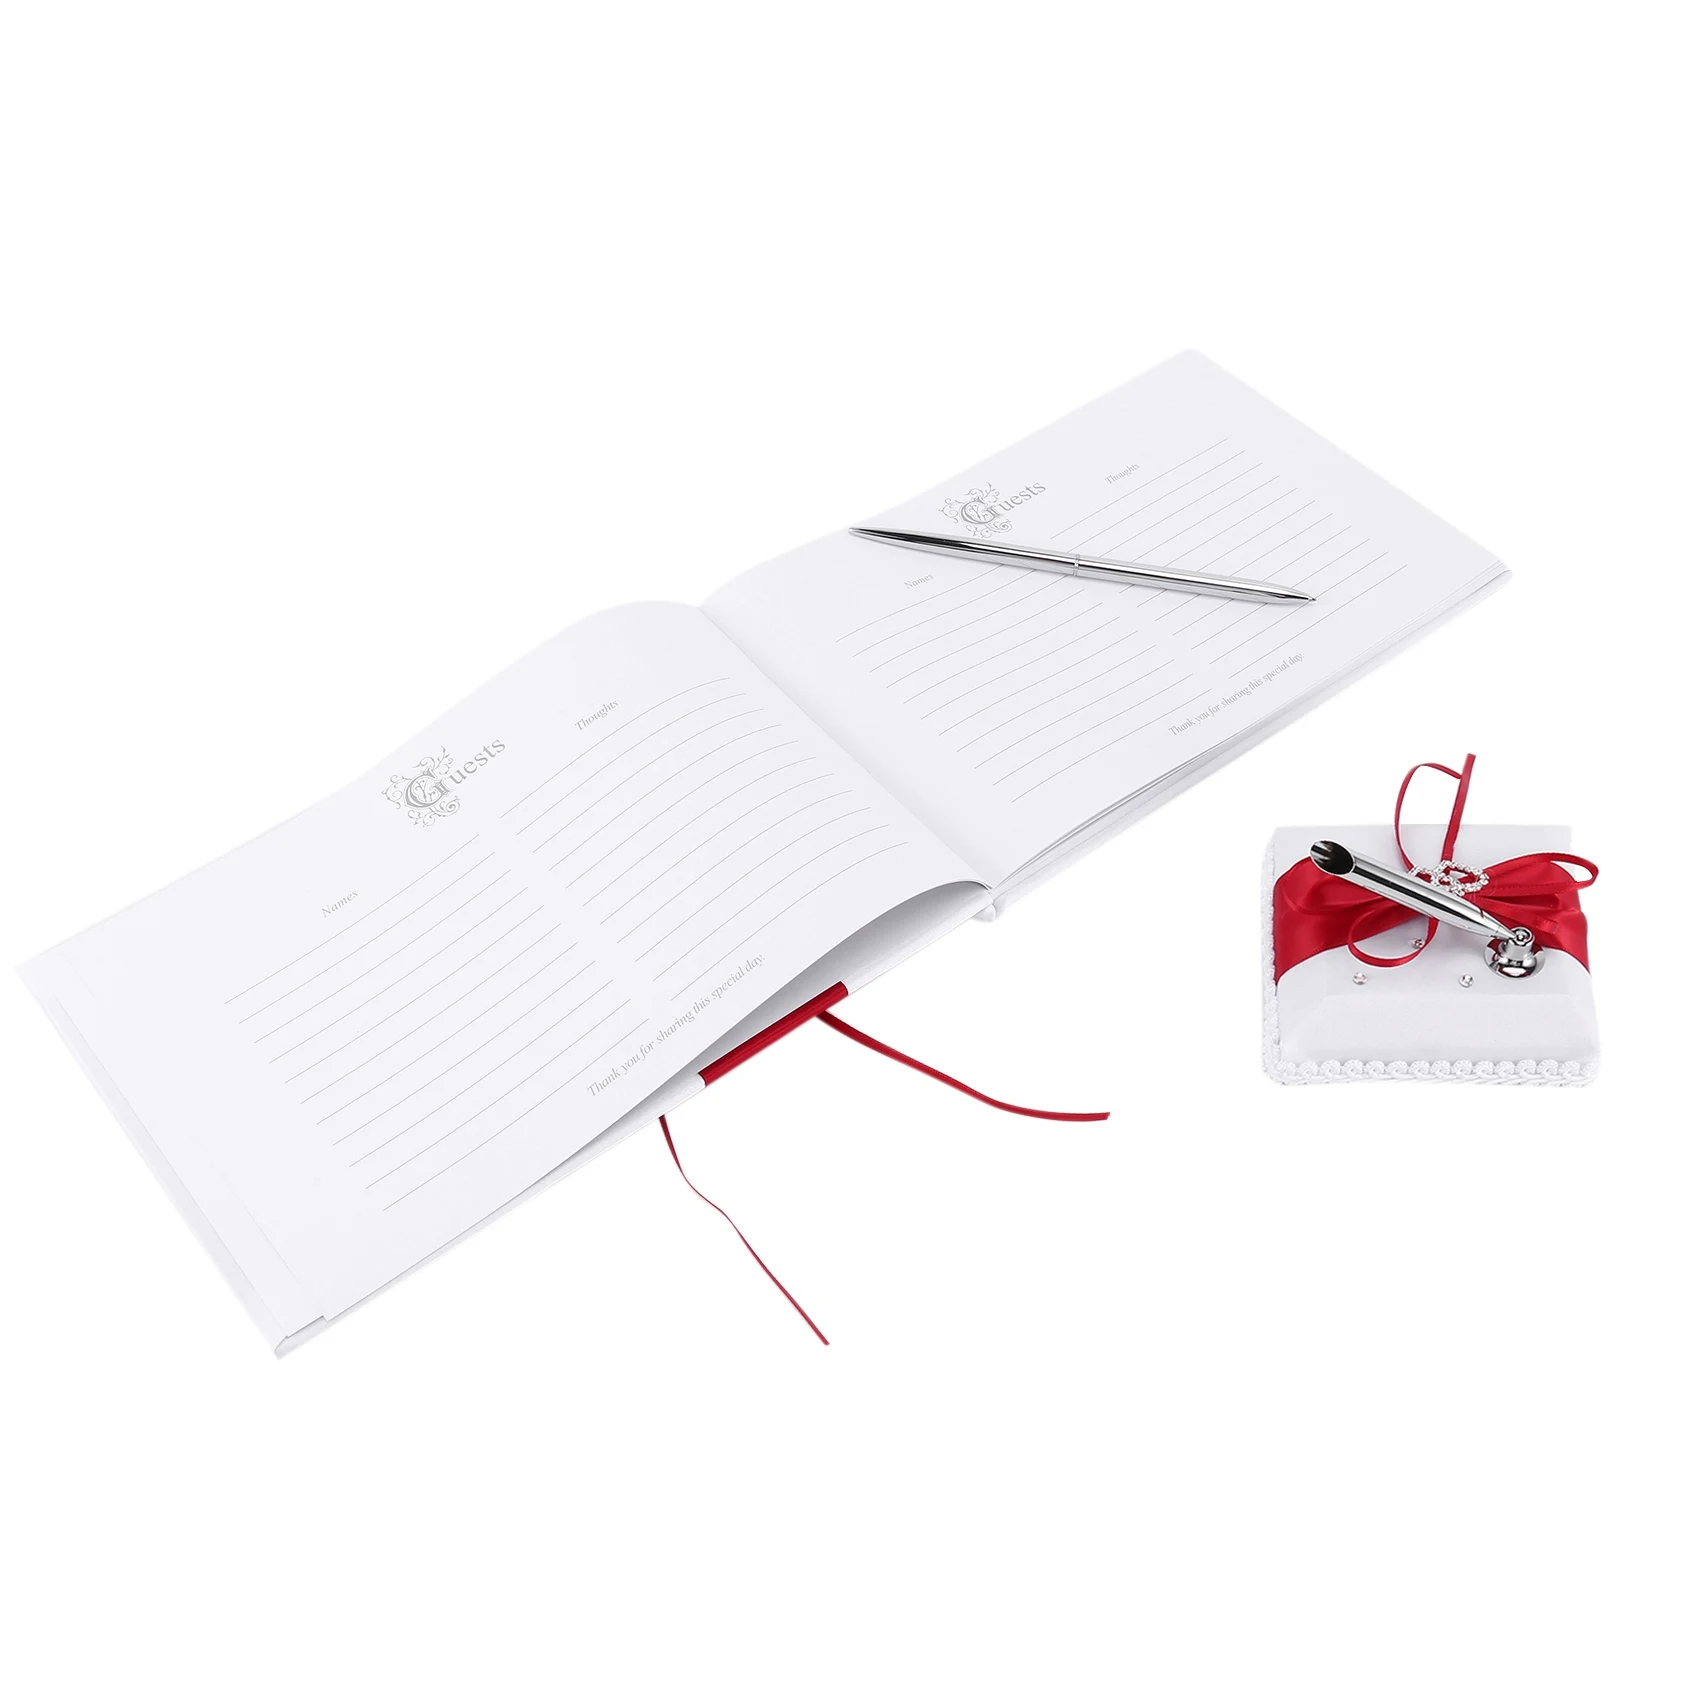 

Wedding Guest Book With Pen Holder Sets Satin Bows Signature Book With Diamonds Love Shape For Party Decorations-Red+White